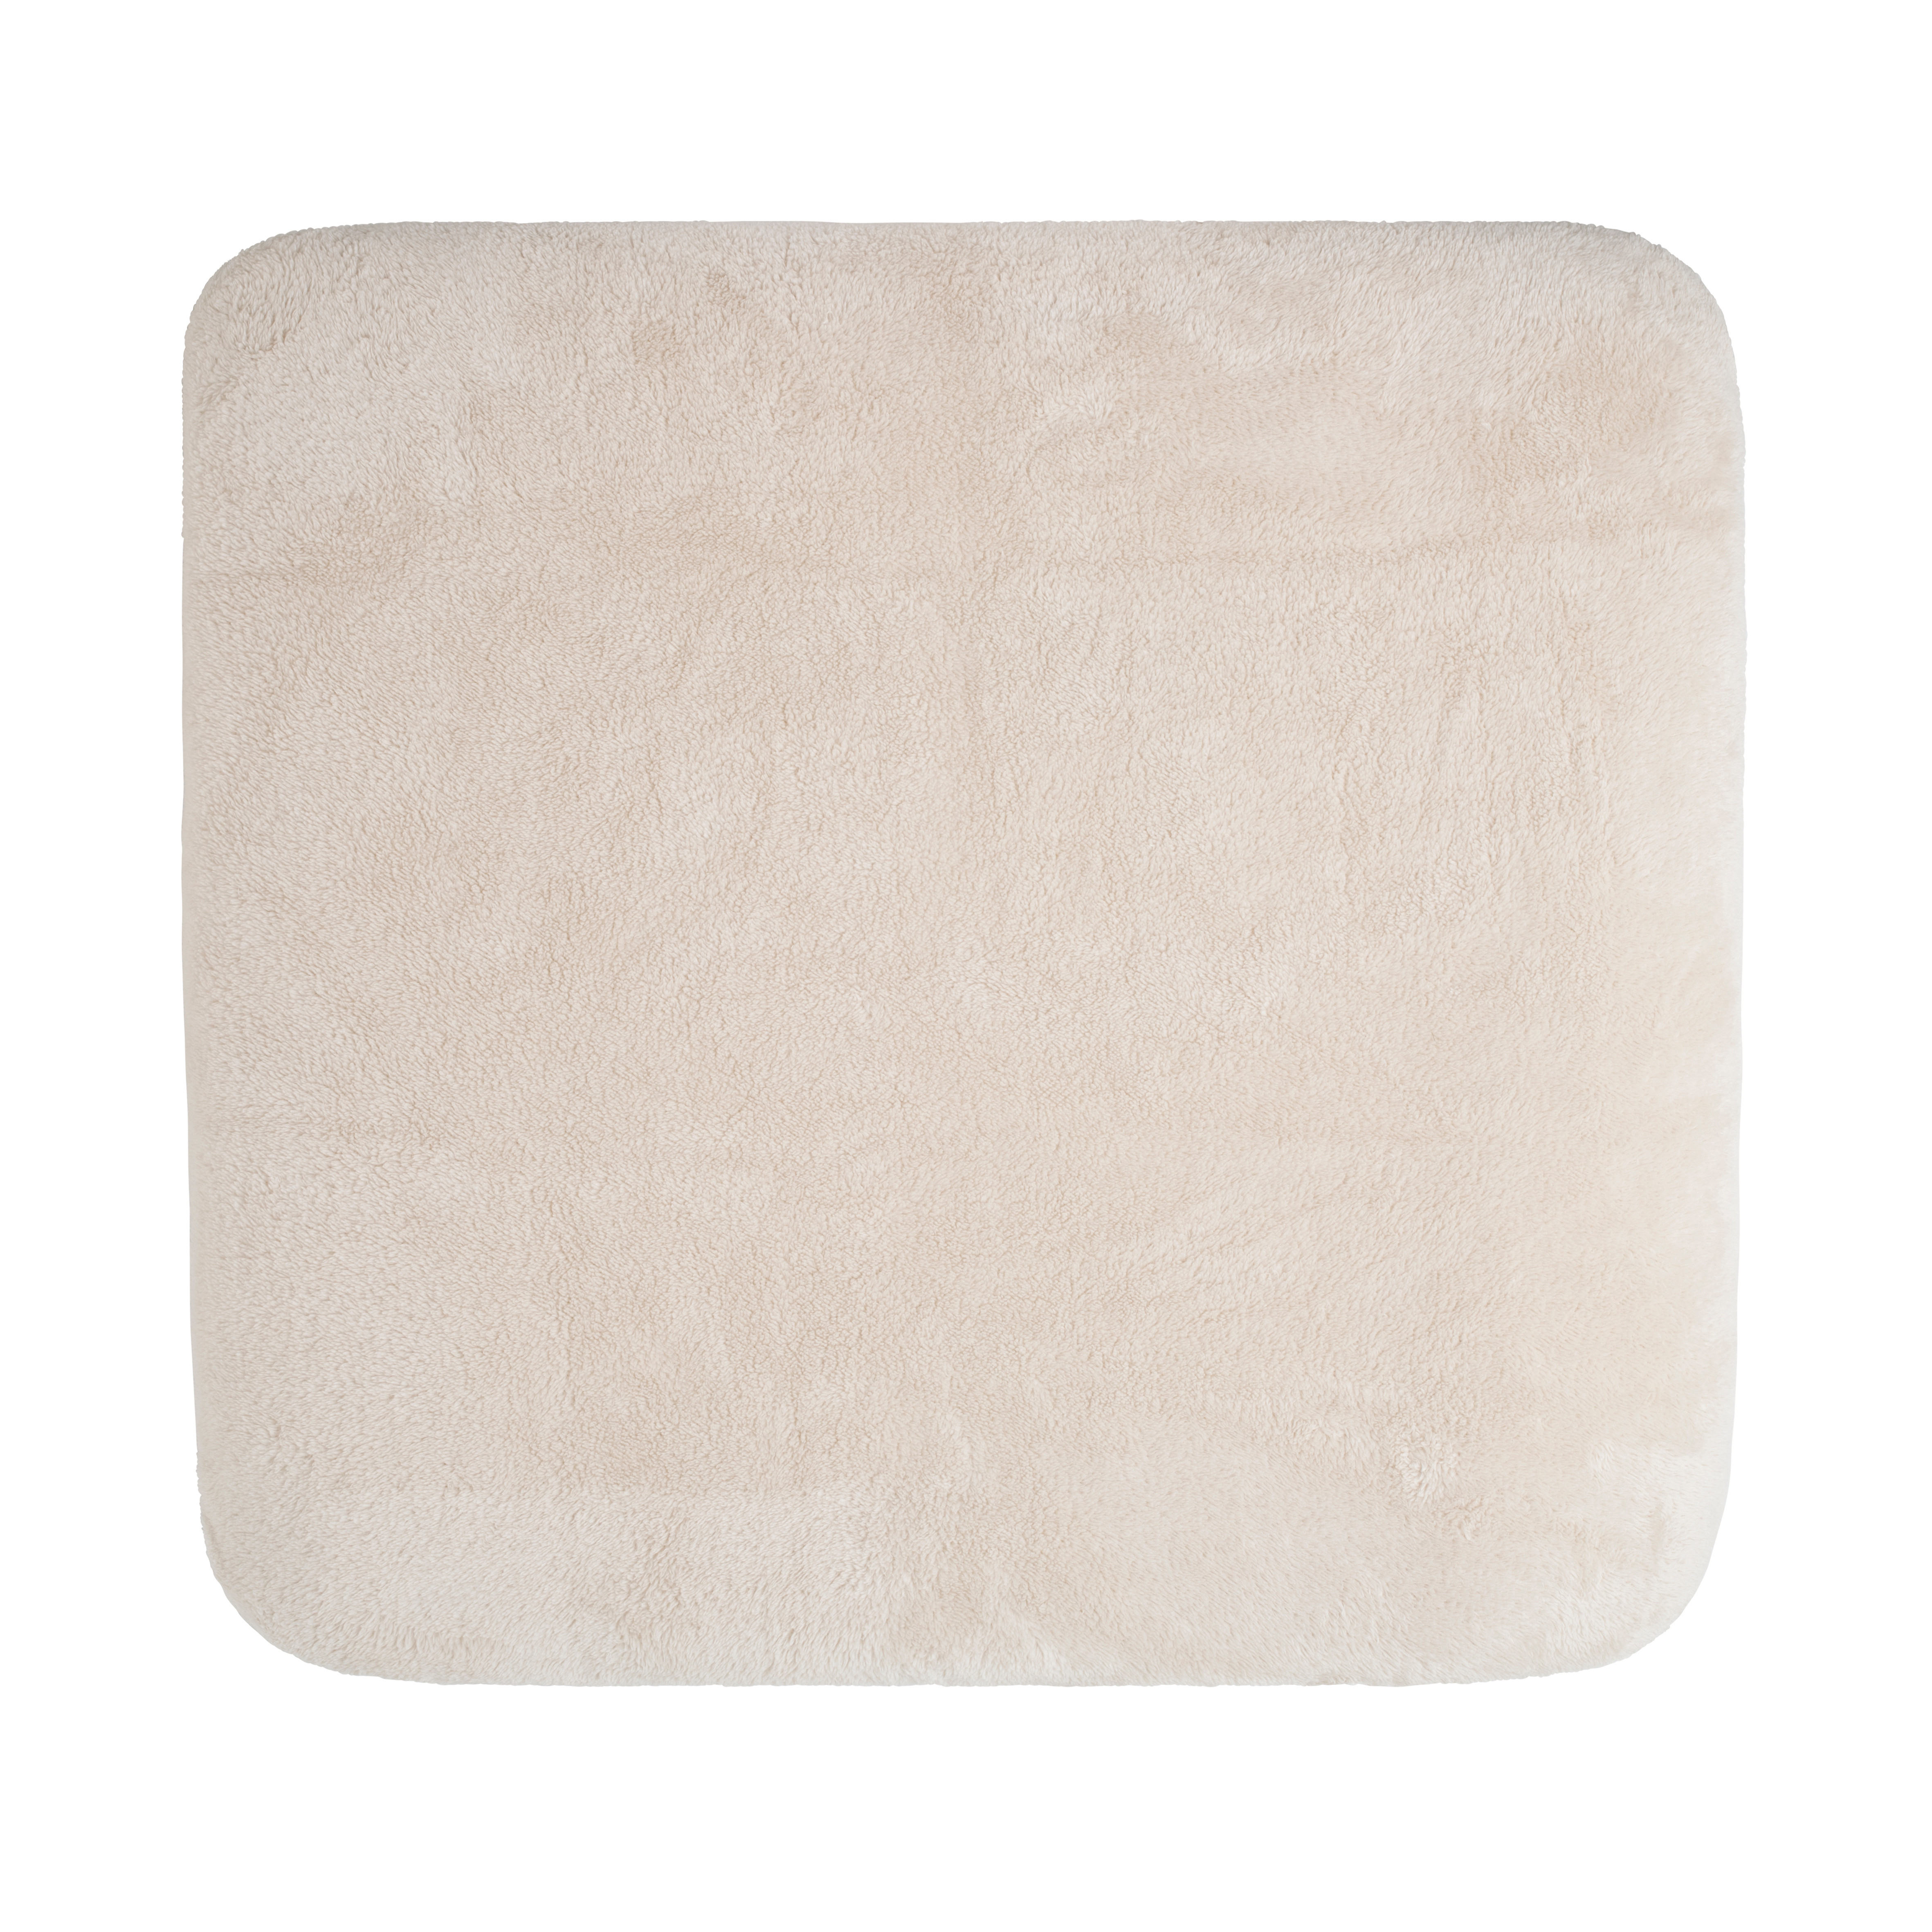 Changing pad cover Cozy warm linen - 75x85